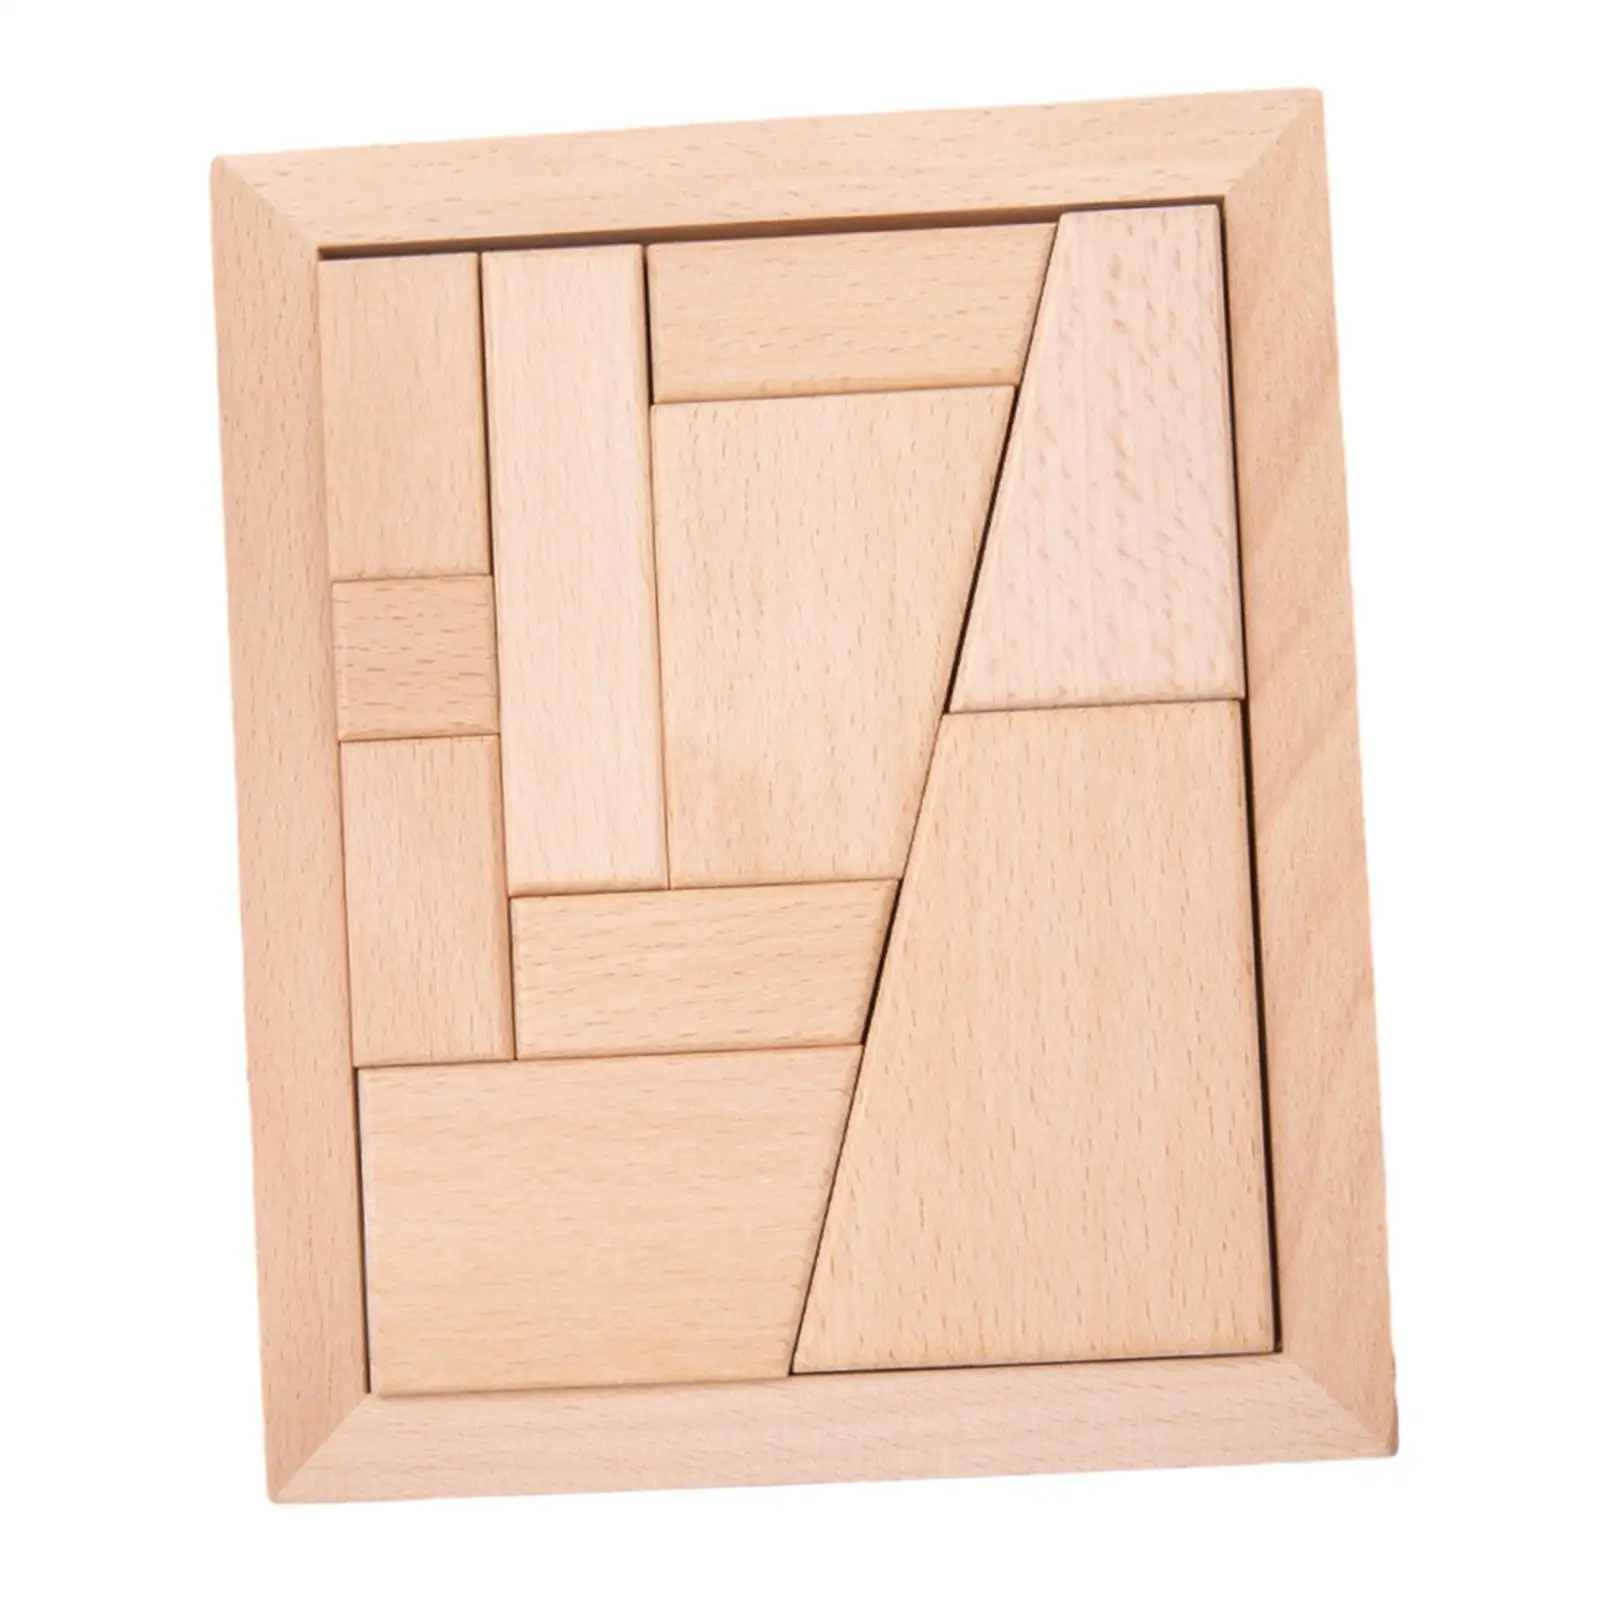 Tangram Wooden Puzzle Children and Adults Challenging Puzzles Teaching Aids Brain Teasers Holiday Gifts Family Portable Puzzles